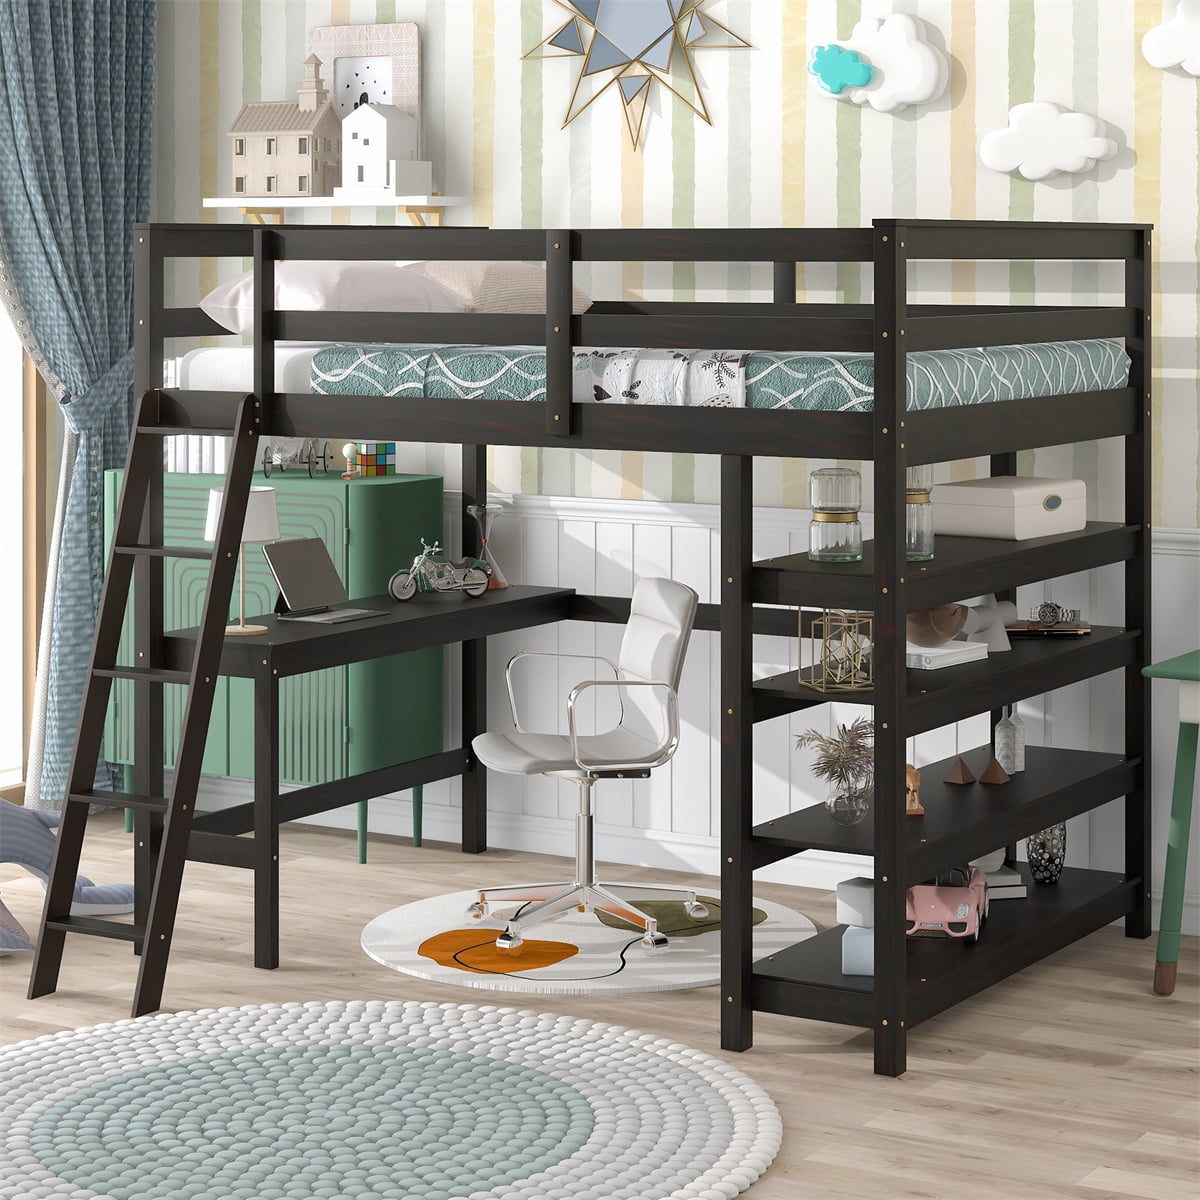 Full Size Loft Bed with Desk and Storage Shelves,Wooden High Loft Bed ...